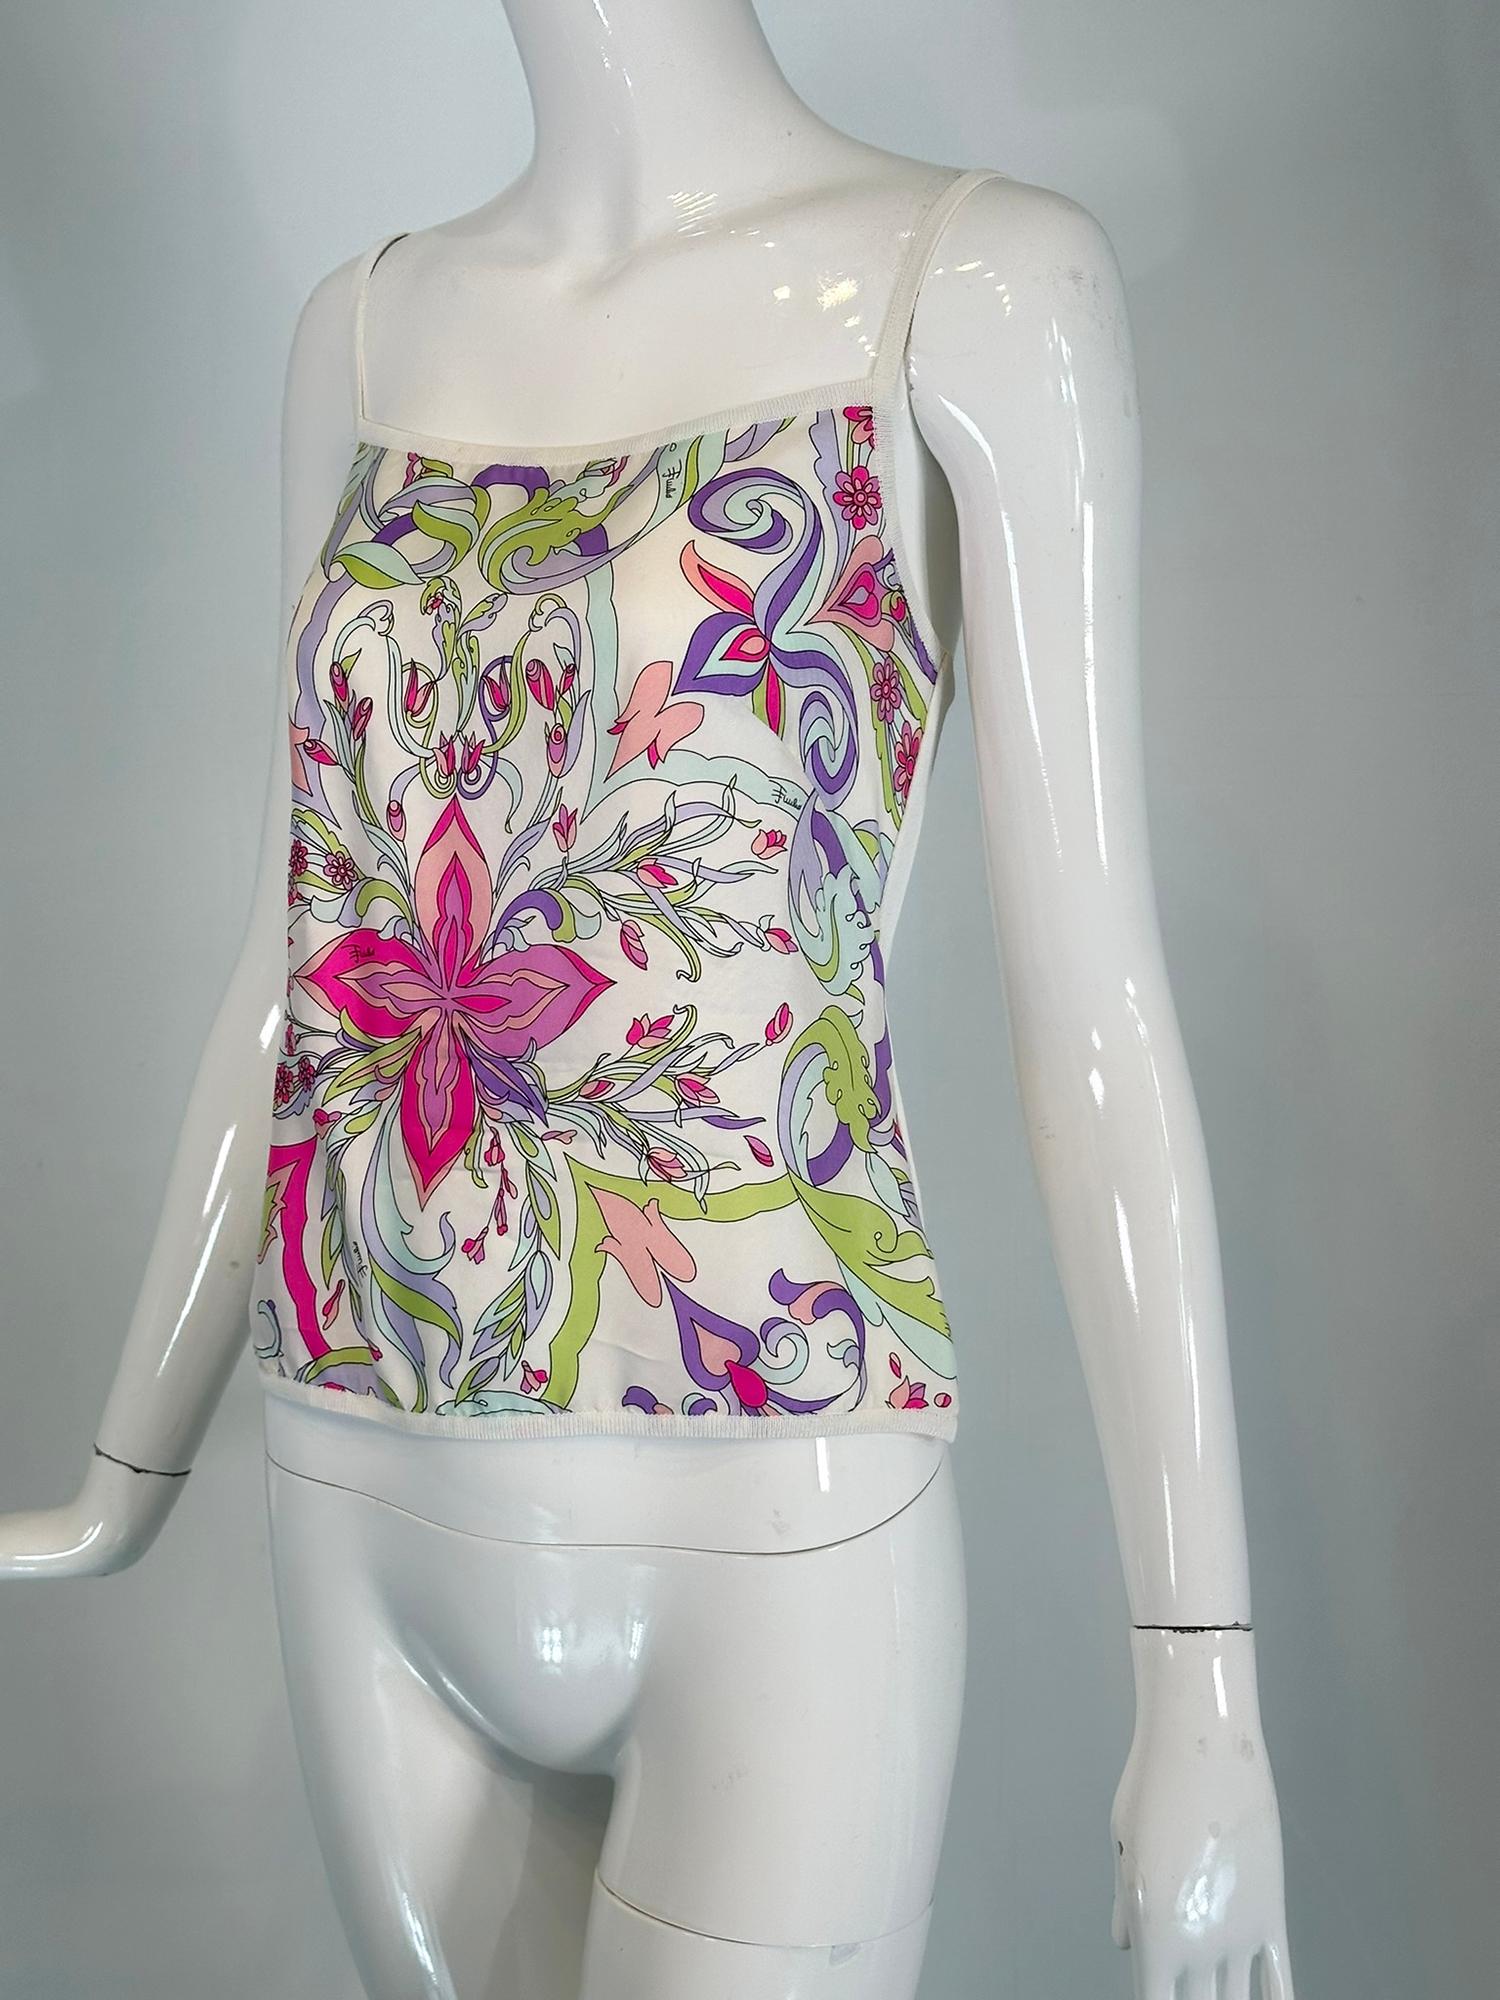 Emilio Pucci silk print camisole top. Beautiful silk print in white, lavender, pink, pale blue, pale green & purple at the front. The back & straps are knit rayon in white. Marked size 8, the back has a bit of stretch. 
In excellent wearable